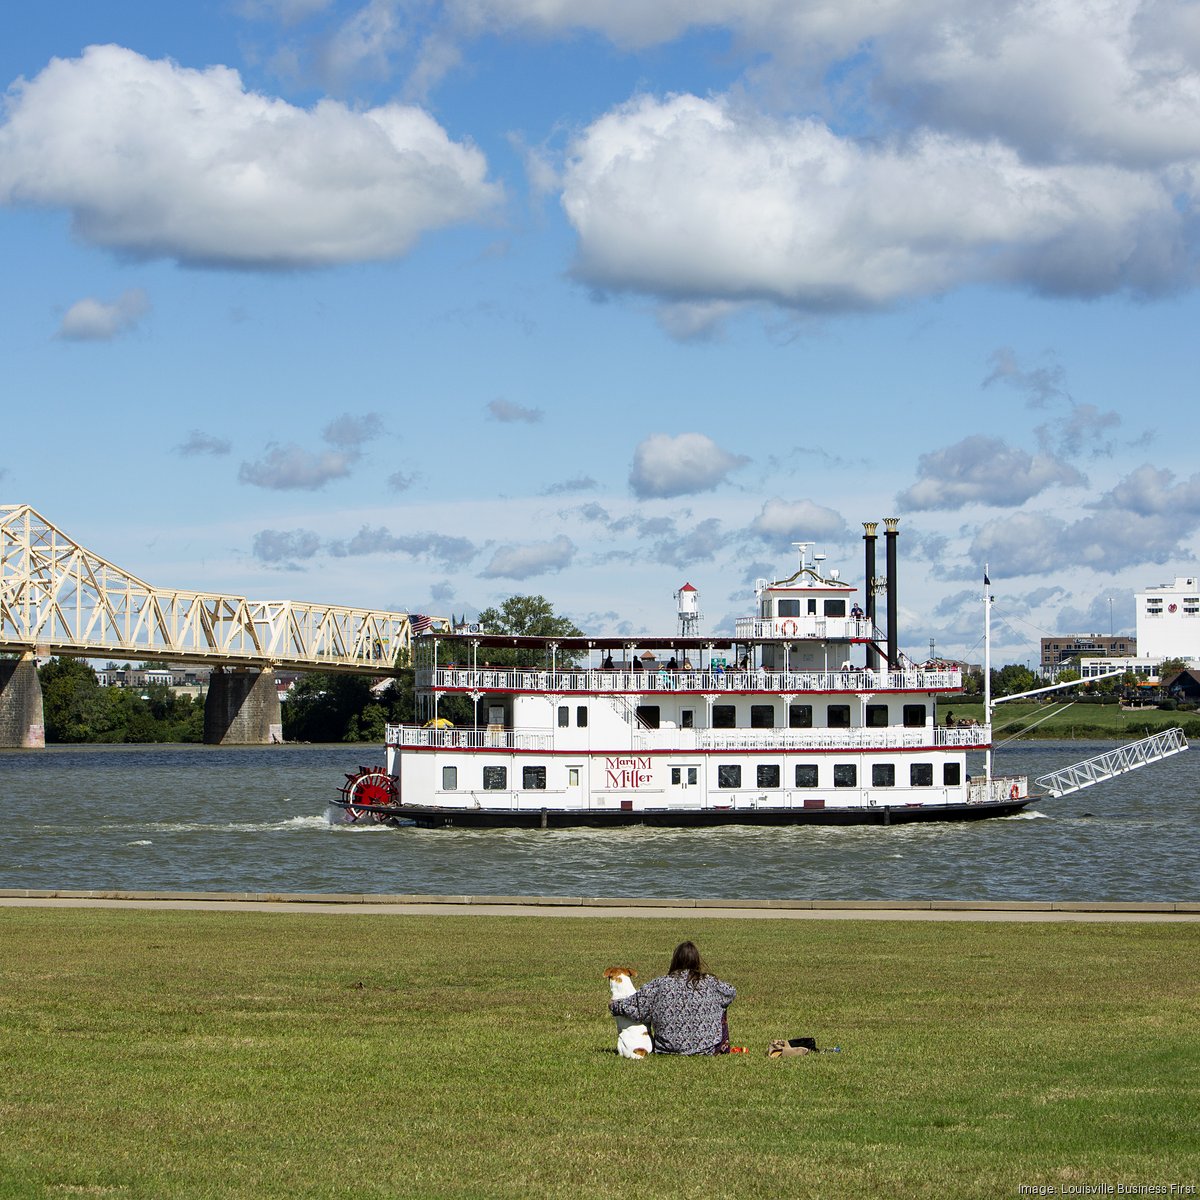 Louisville's Waterfront Park Voted One Of USA Today's Top Three